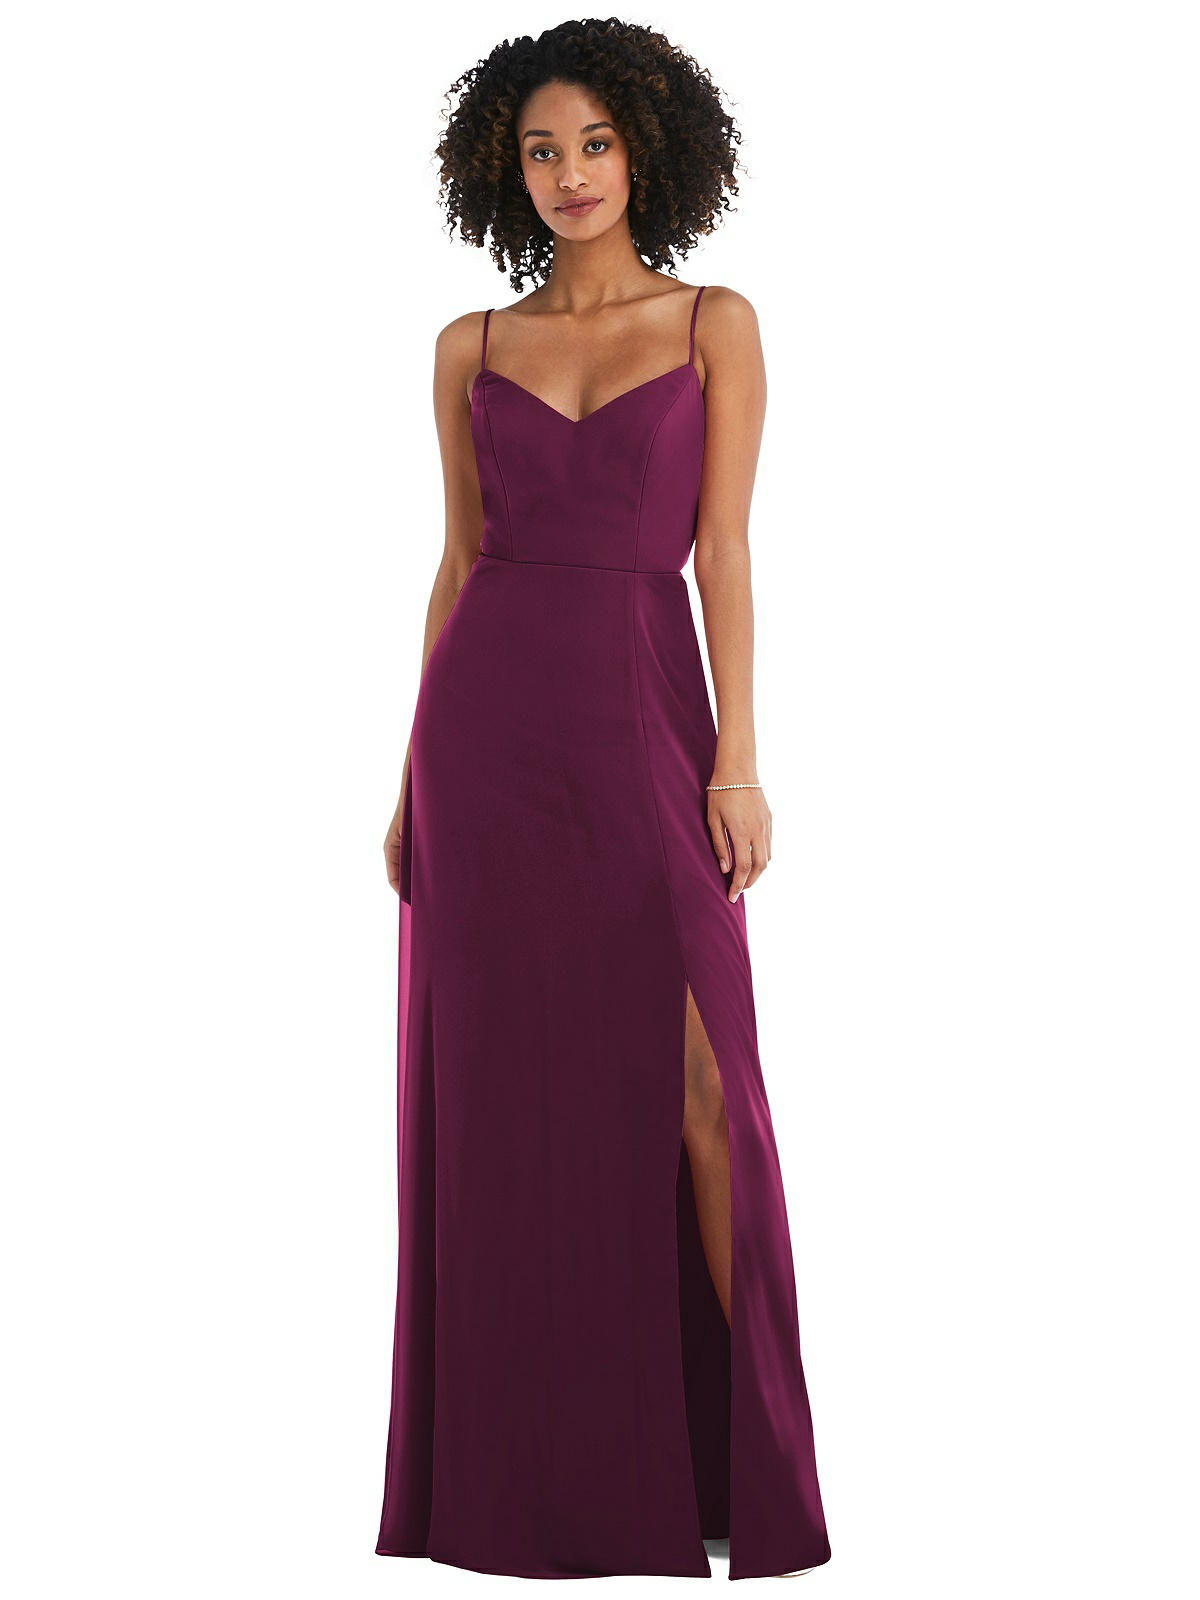 Ashleigh Ruby Red Bridesmaid Dress by Dessy - Bridesmaids Only